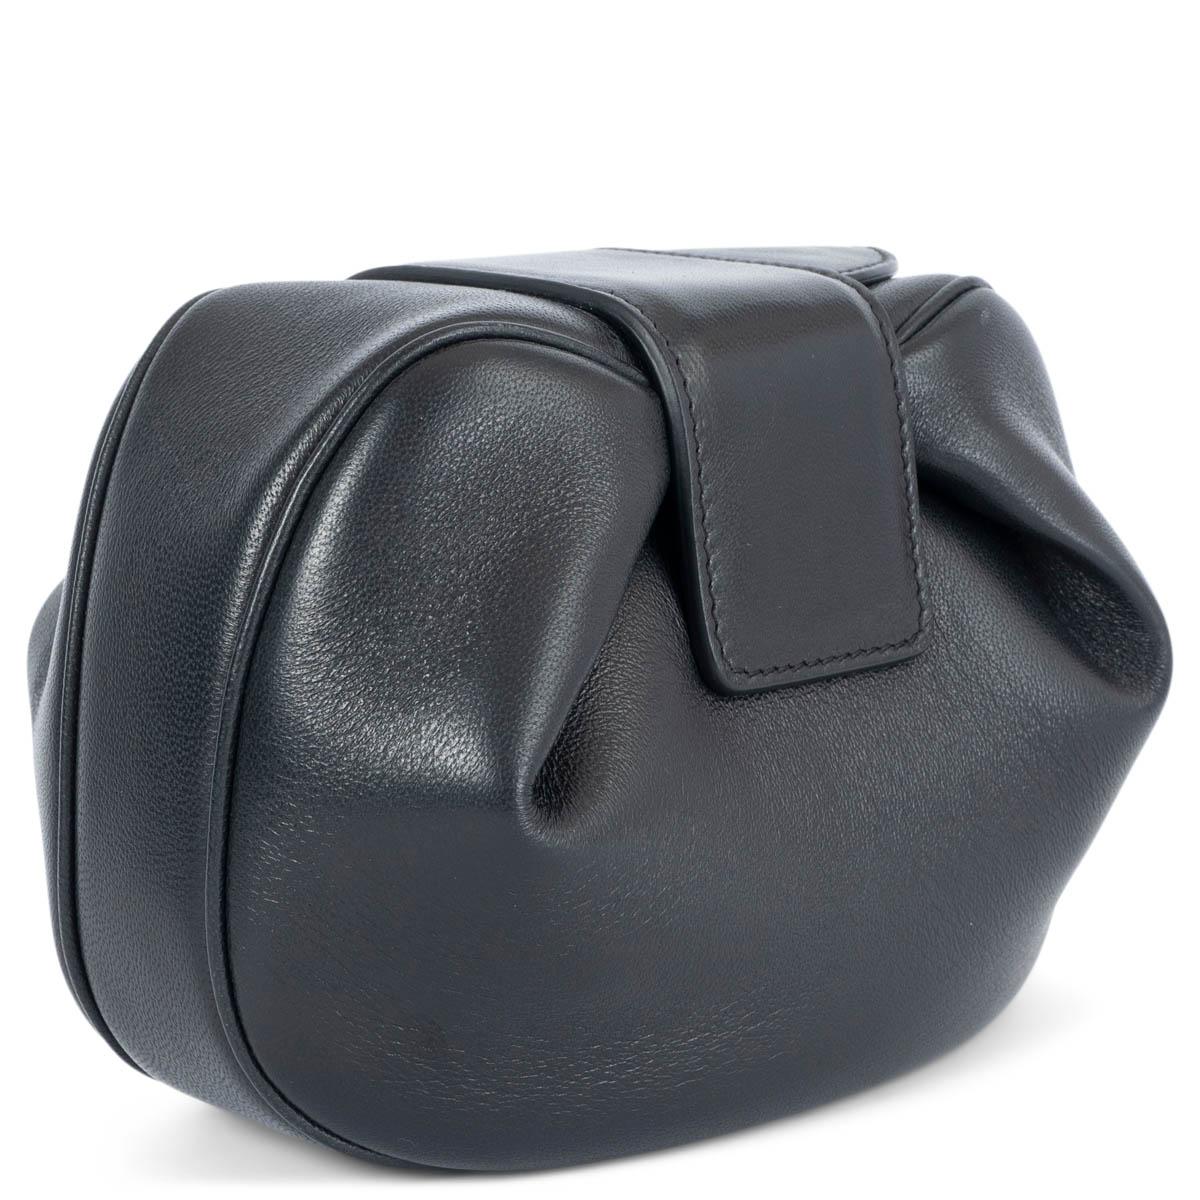 100% authentic Gabriela Hearst Soft Demi clutch in smooth black lambskin leather. A round pouch that gently unfolds. Has been carried once and is in virtually new condition. 

Measurements
Height	13cm (5.1in)
Width	18cm (7in)
Depth	7cm (2.7in)

All